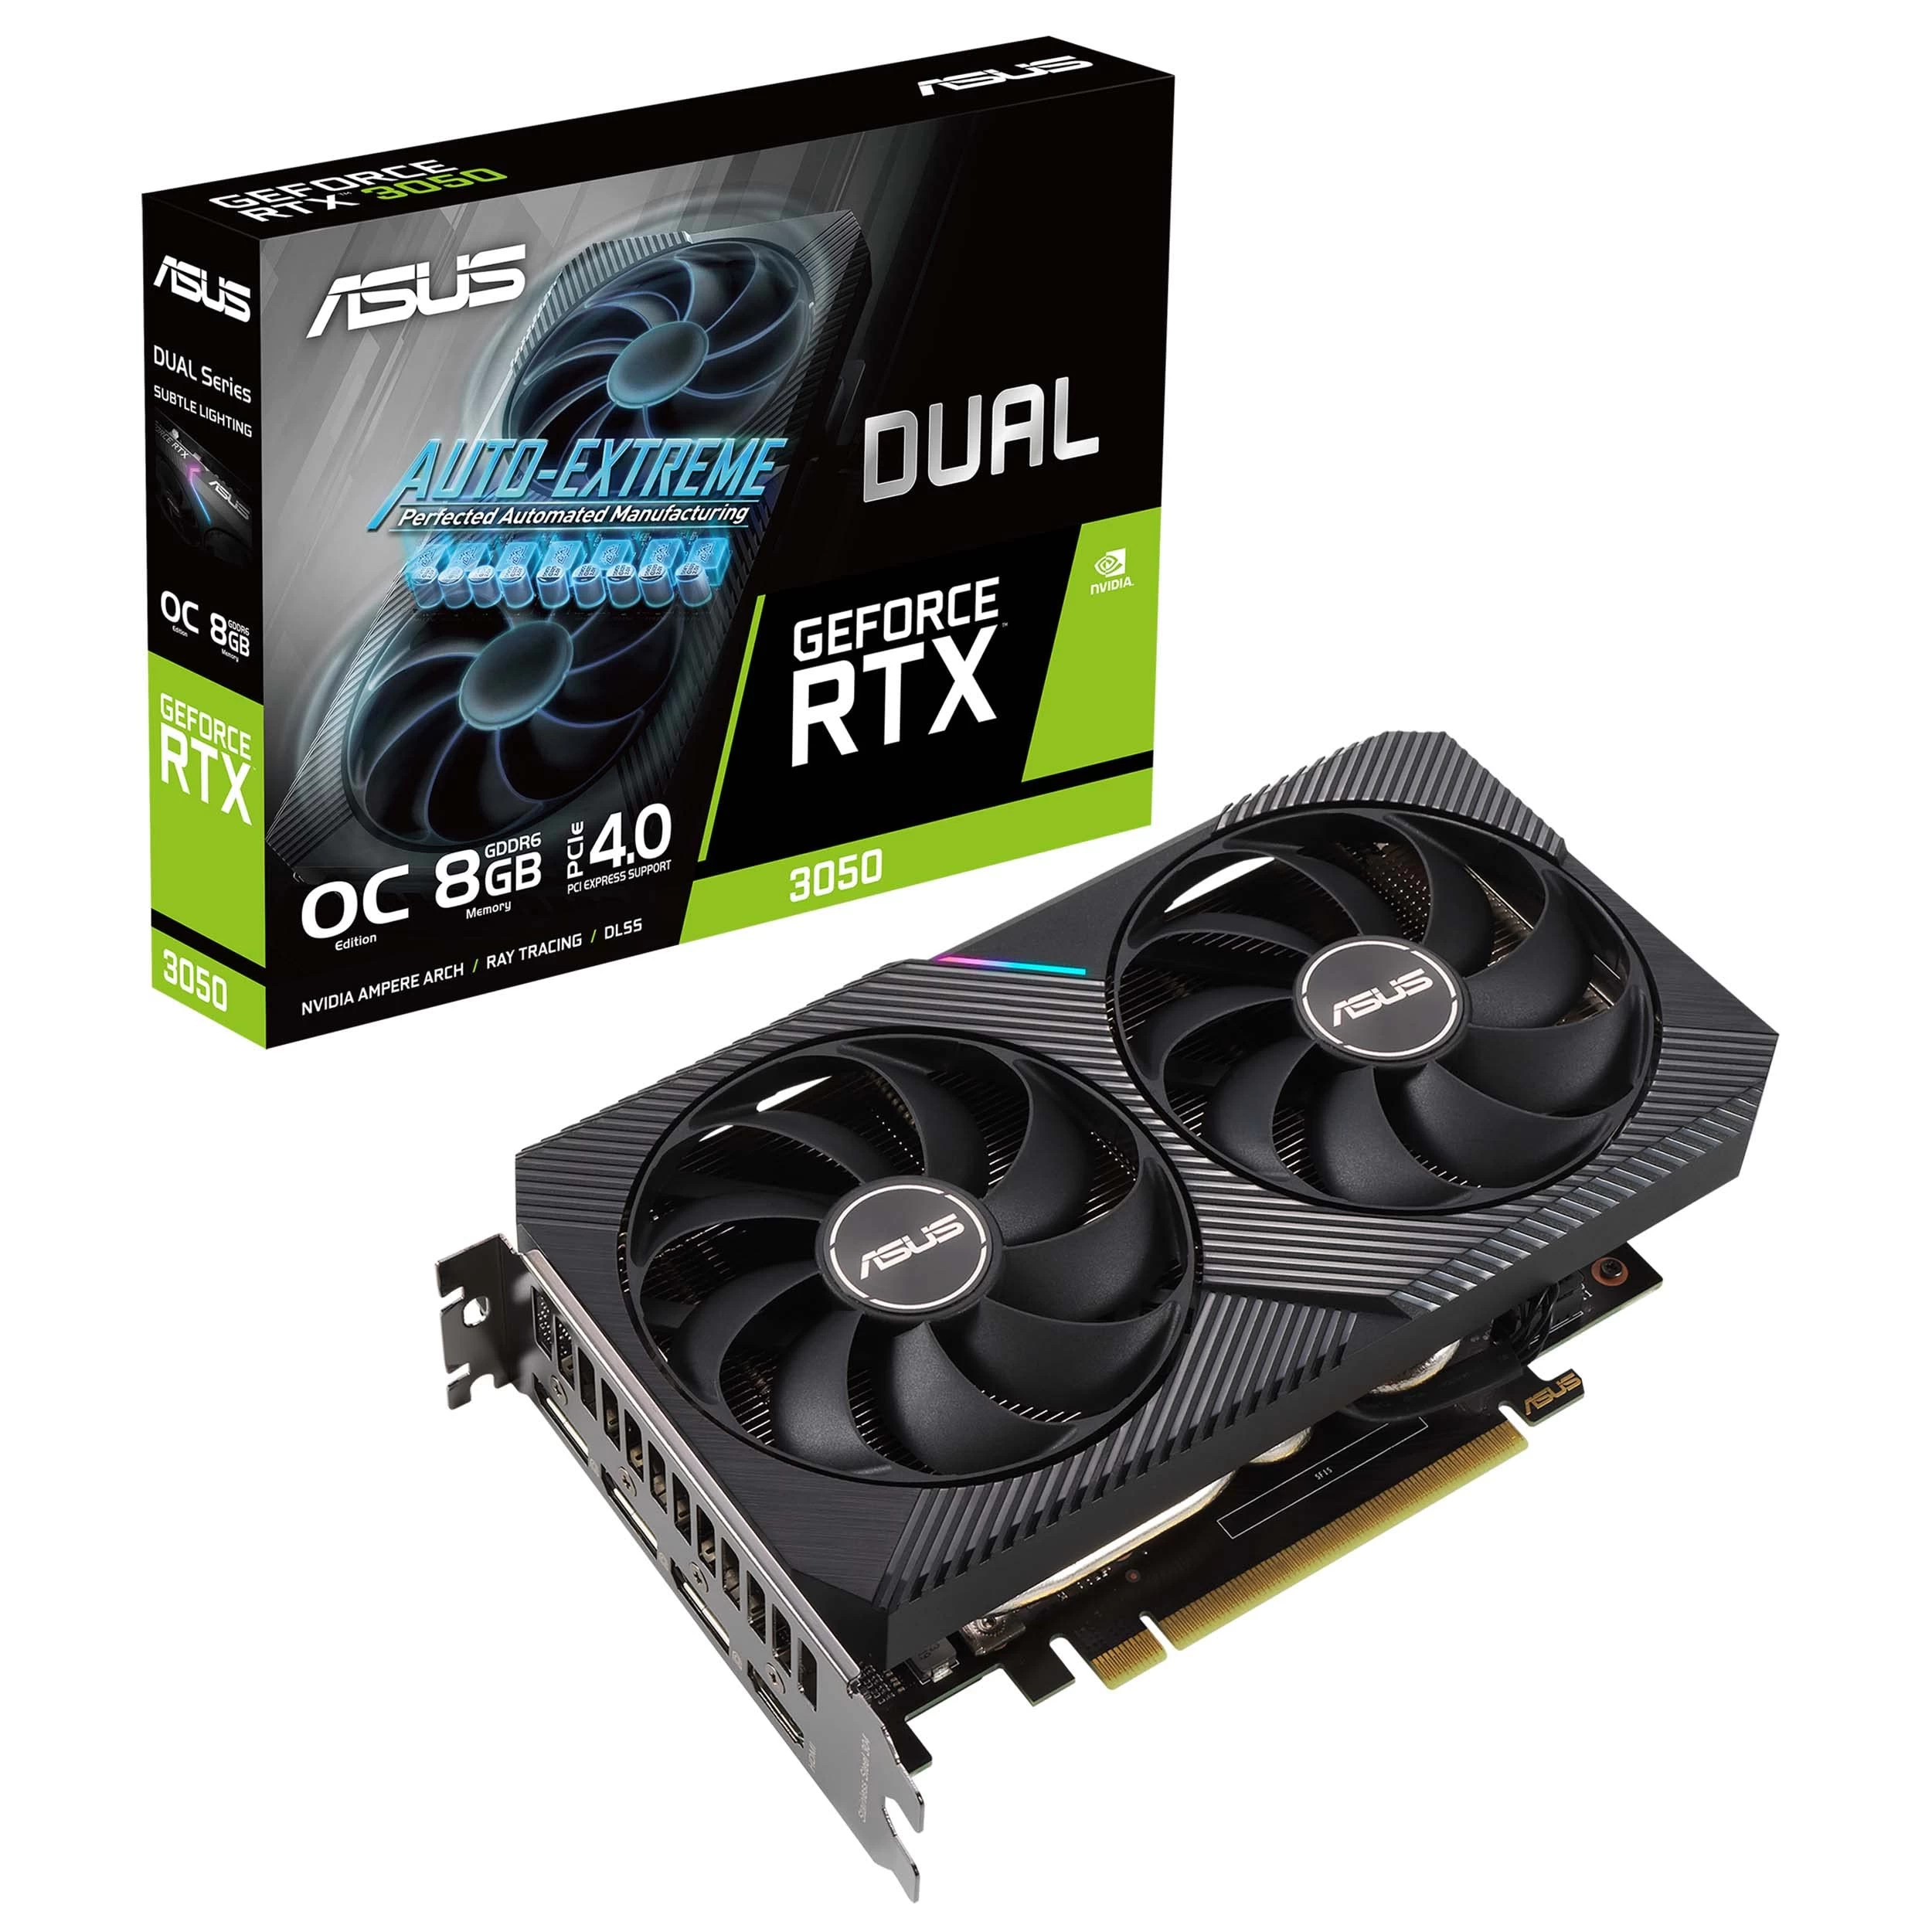 ASUS Dual GeForce RTX 3050 OC Edition 8GB Package